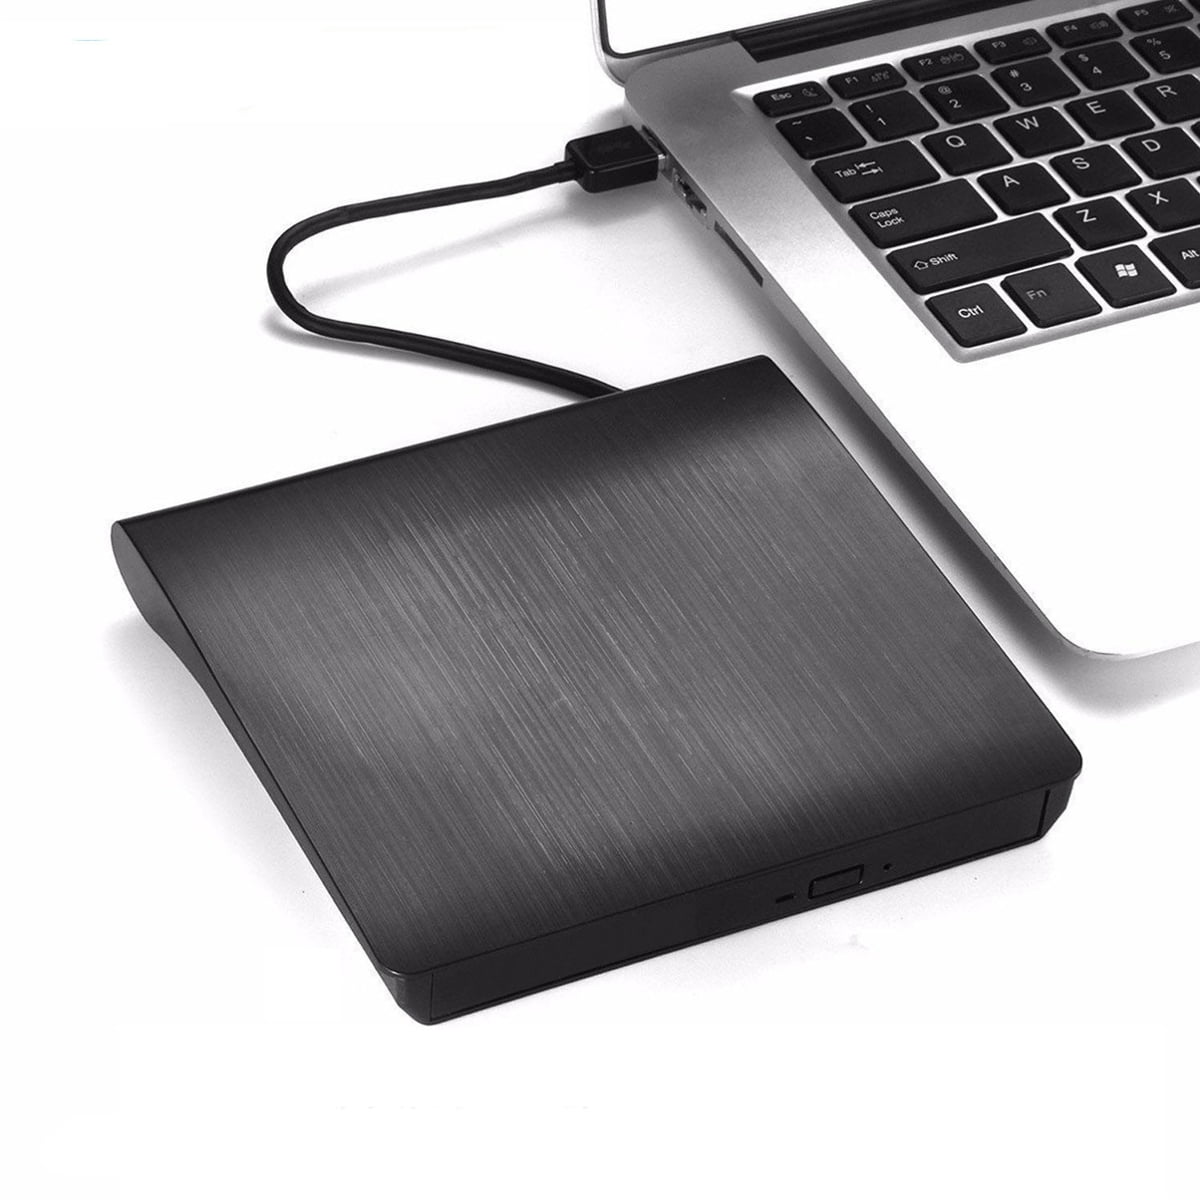 Arrowhead Opaque Andragende External CD DVD Drive for PC Laptop, DVD Player CD Burner USB 3.0 Portable  CD DVD +/-RW External Disk Drive Optical Drive Slim CD DVD ROM Recorder  Writer fits for Mac/Windows/Linux -